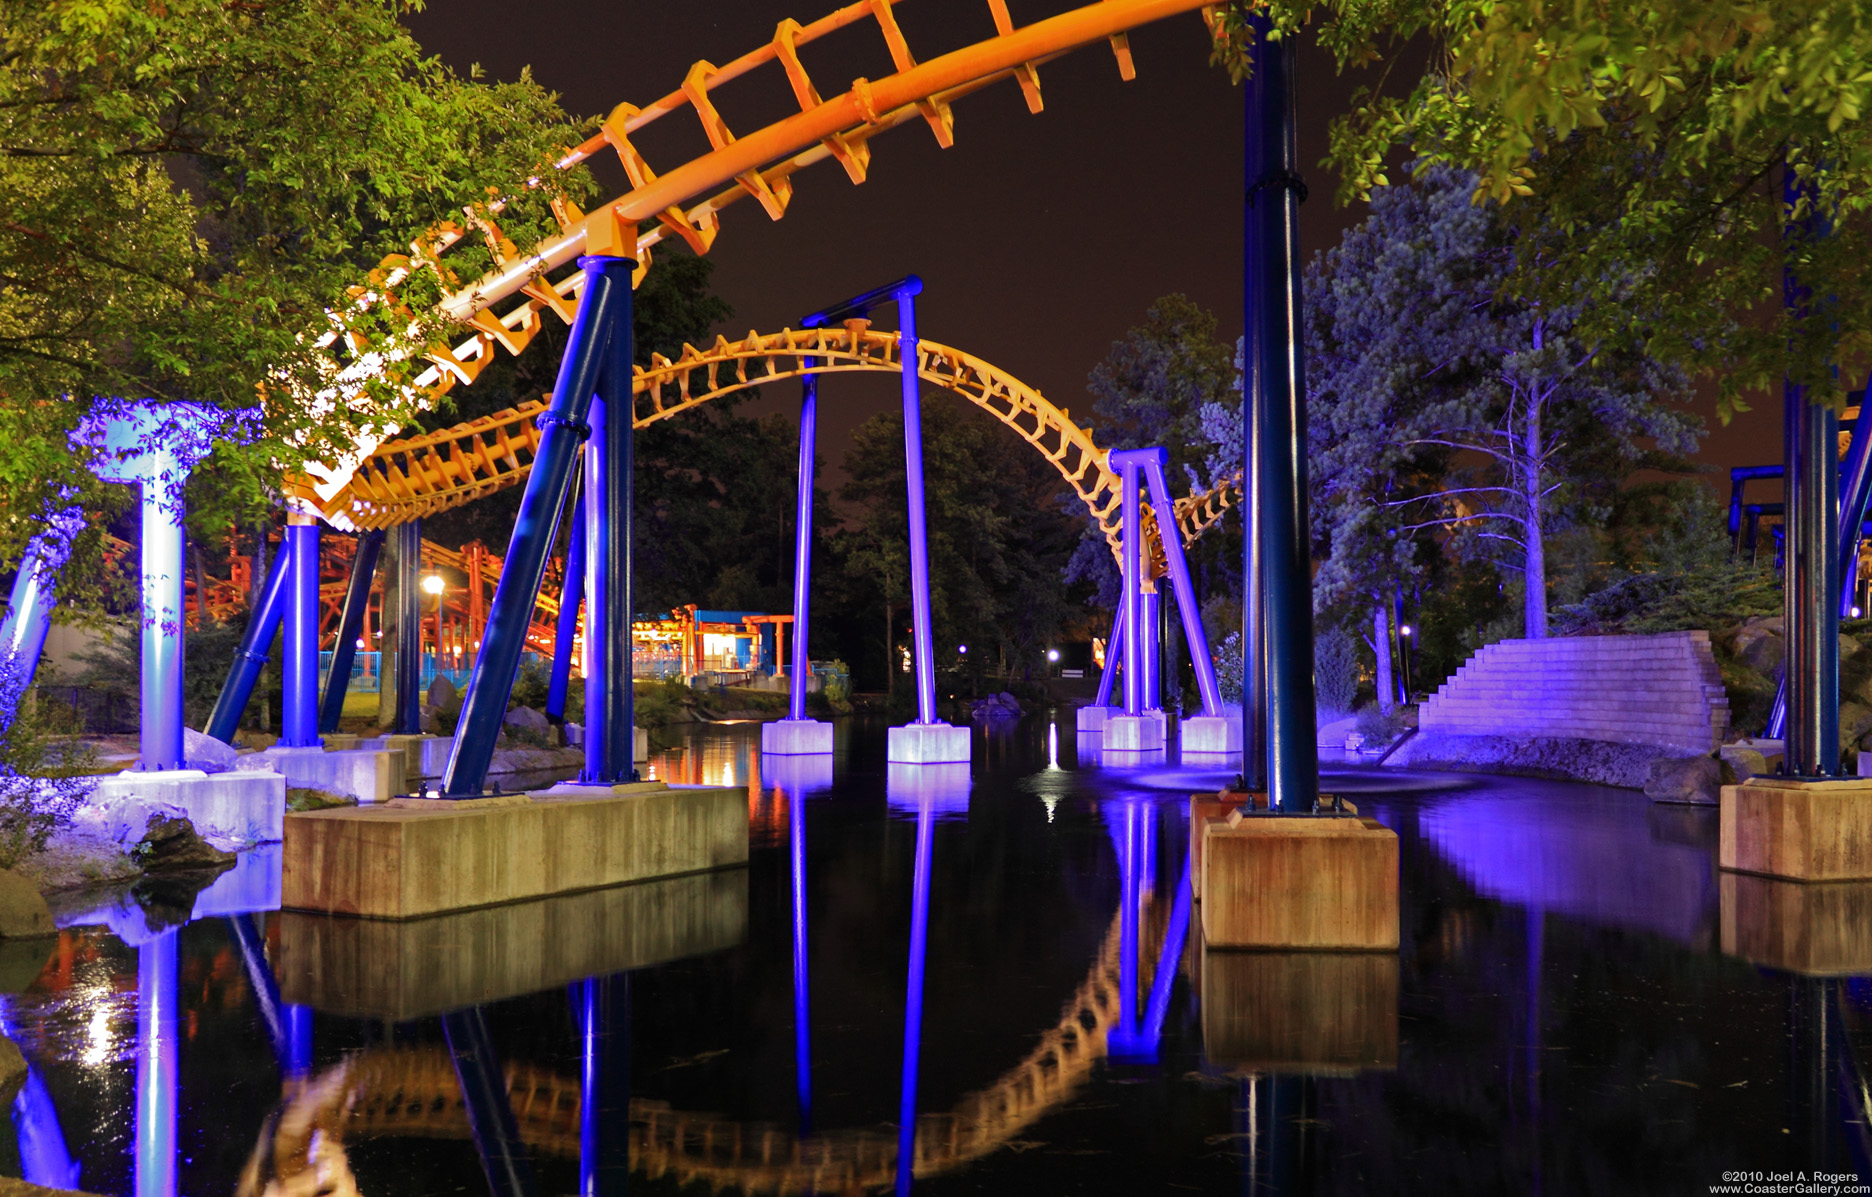 A roller coaster reflected in the water at night